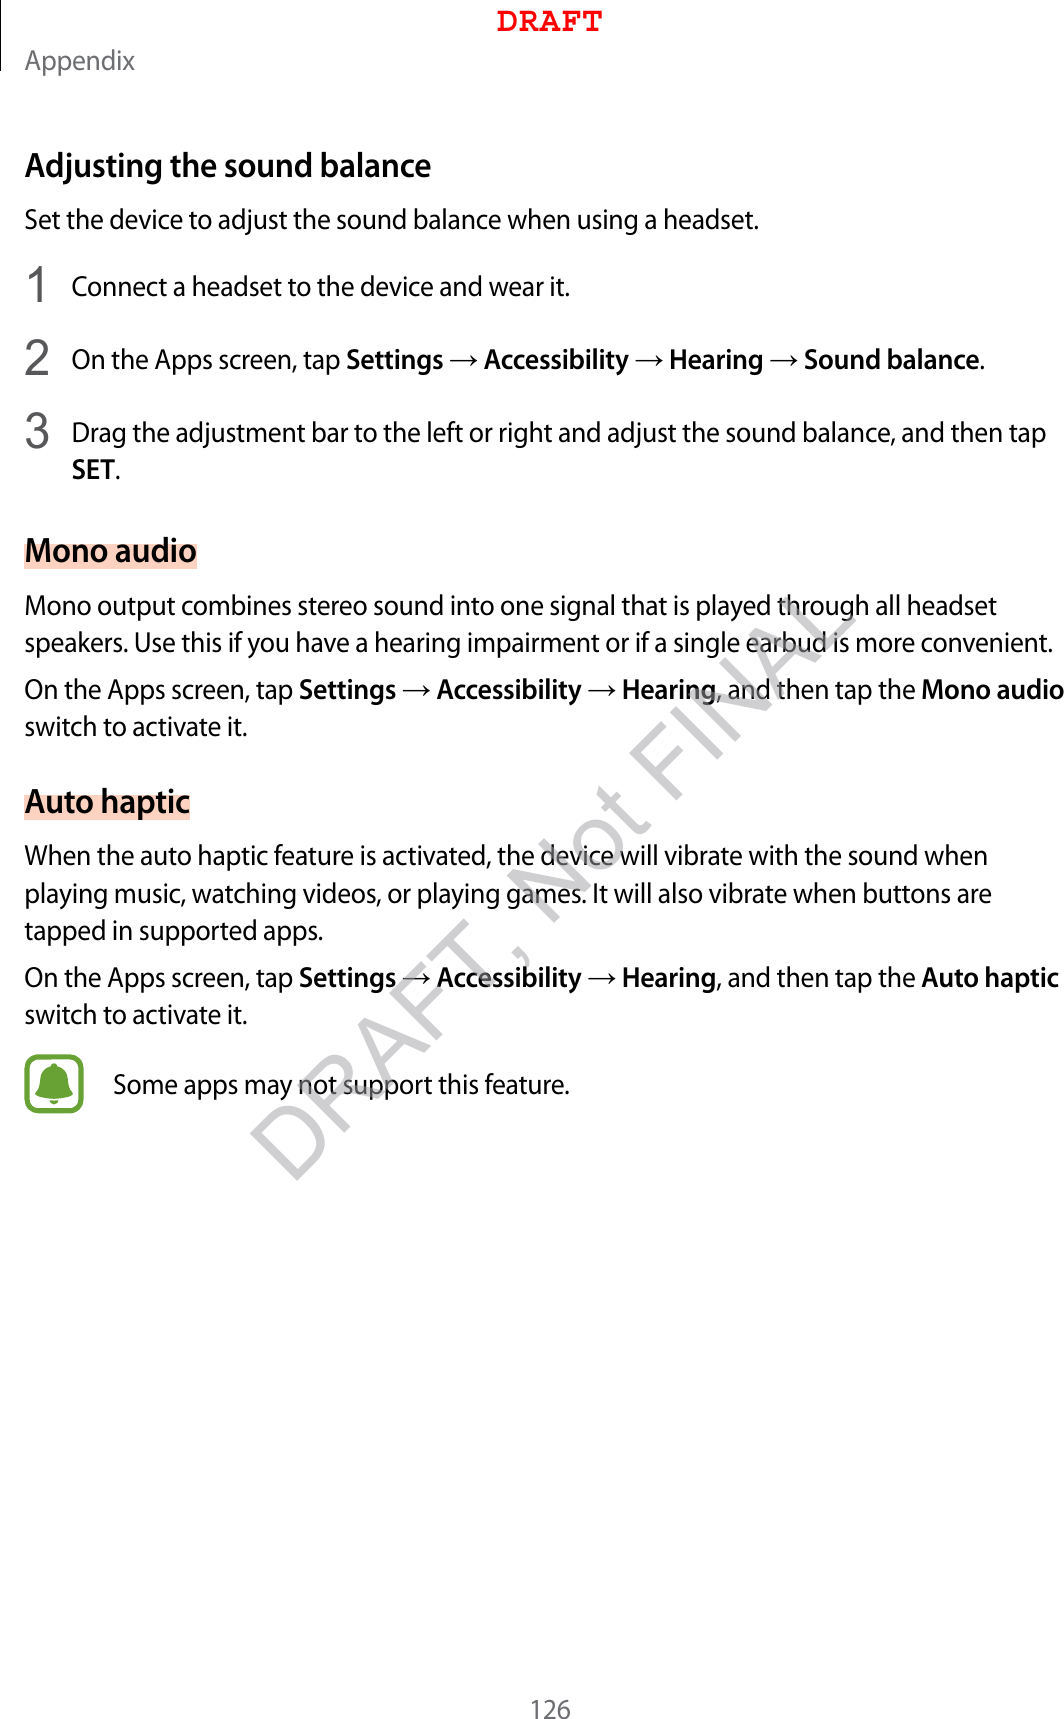 Appendix126Adjusting the sound balanceSet the device to adjust the sound balance when using a headset.1  Connect a headset to the device and wear it.2  On the Apps screen, tap Settings  Accessibility  Hearing  Sound balance.3  Drag the adjustment bar to the left or right and adjust the sound balance, and then tap SET.Mono audioMono output combines stereo sound into one signal that is played through all headset speakers. Use this if you have a hearing impairment or if a single earbud is more convenient.On the Apps screen, tap Settings  Accessibility  Hearing, and then tap the Mono audio switch to activate it.Auto hapticWhen the auto haptic feature is activated, the device will vibrate with the sound when playing music, watching videos, or playing games. It will also vibrate when buttons are tapped in supported apps.On the Apps screen, tap Settings  Accessibility  Hearing, and then tap the Auto haptic switch to activate it.Some apps may not support this feature.DRAFTDRAFT, Not FINAL